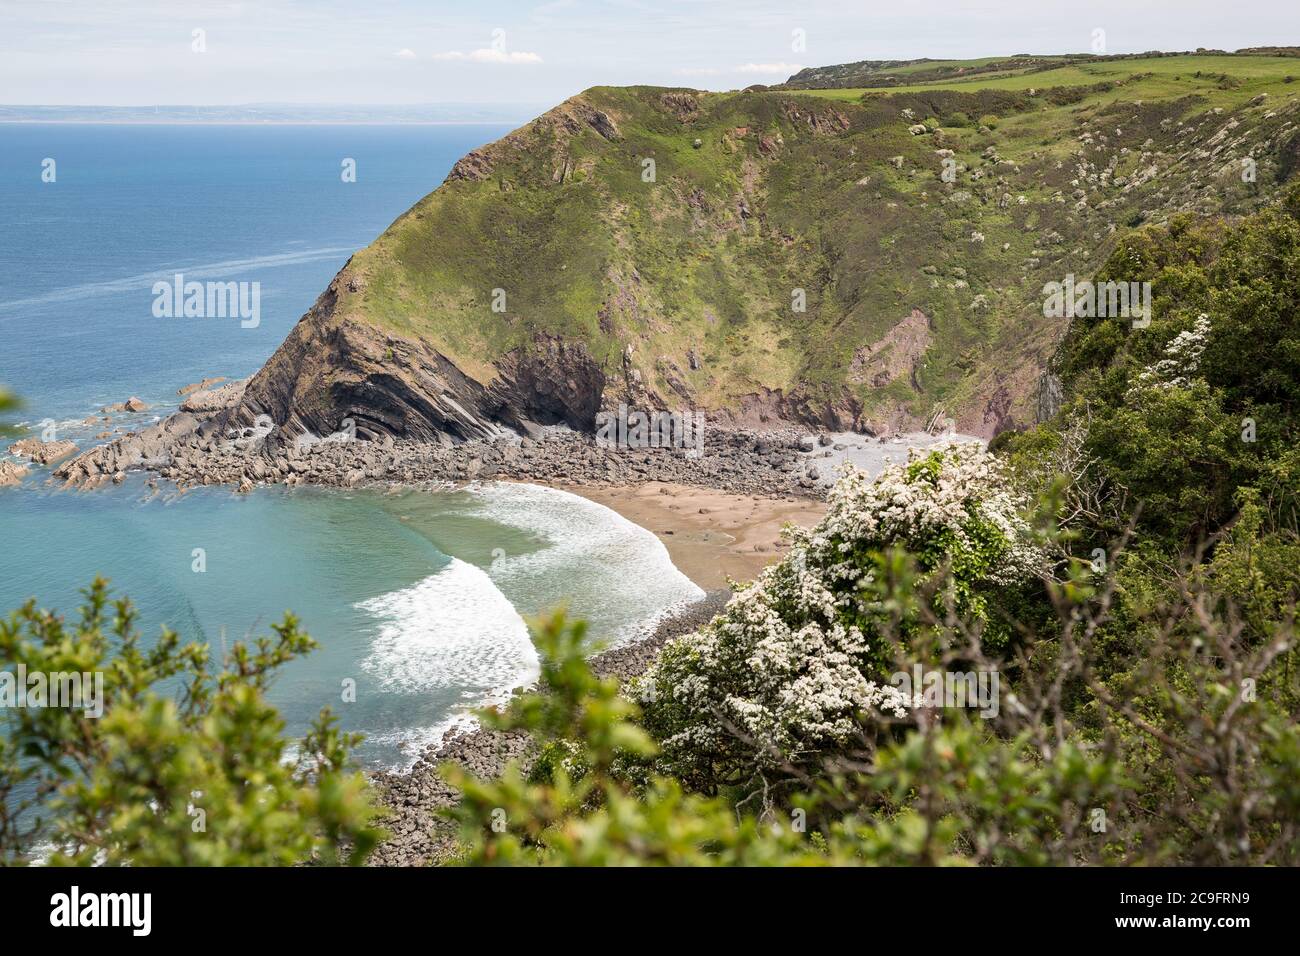 Shipload Bay on Devon's coast with waves rolling in Stock Photo